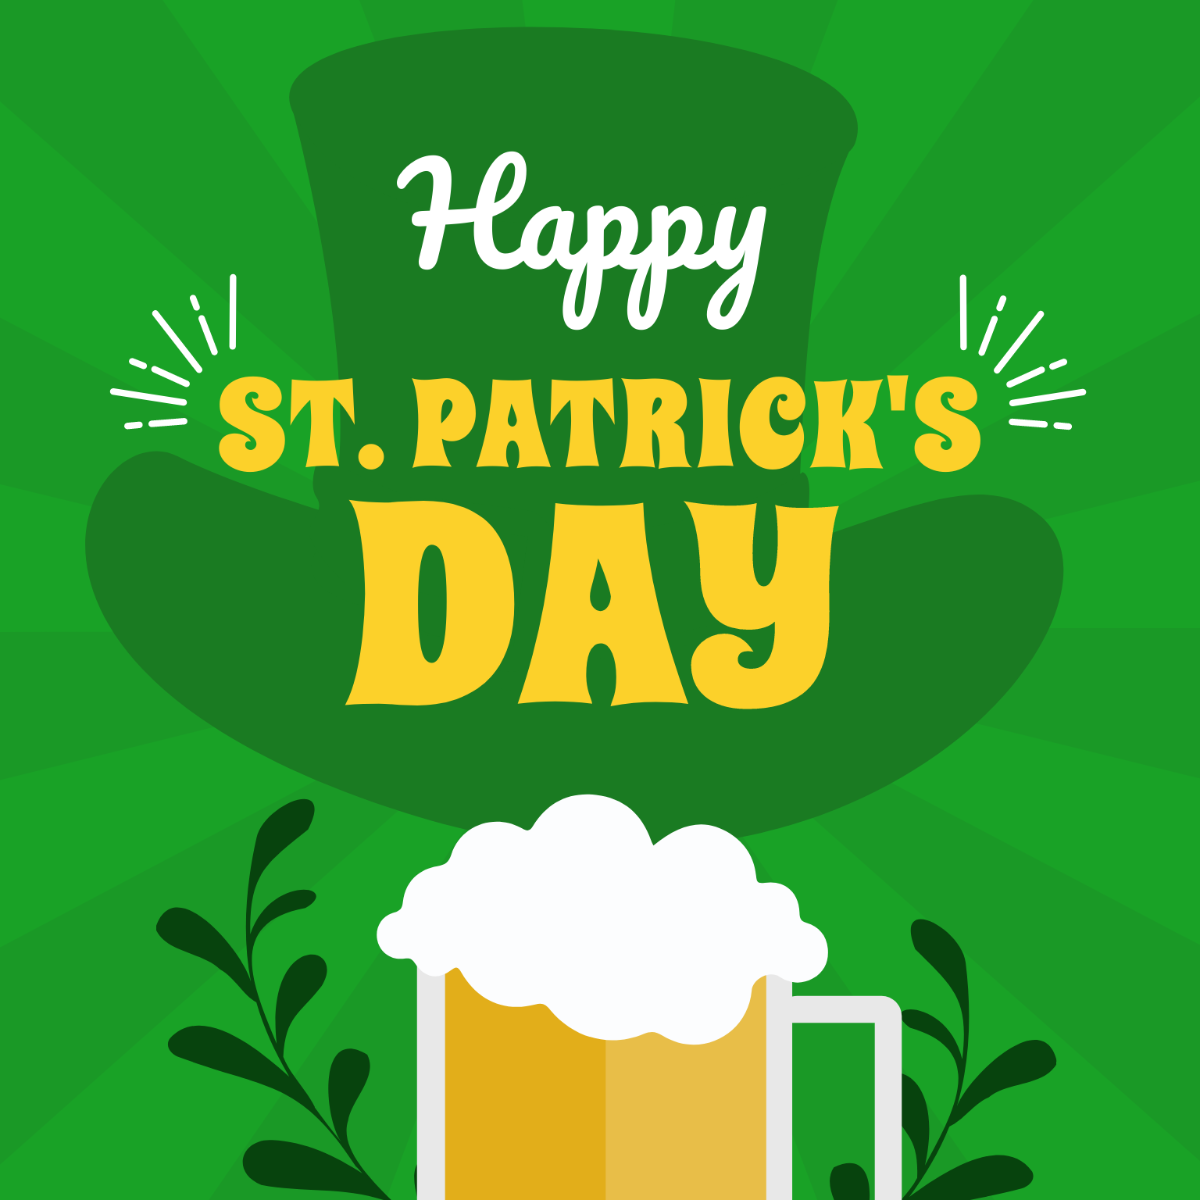 St. Patrick's Day Vector Art Template